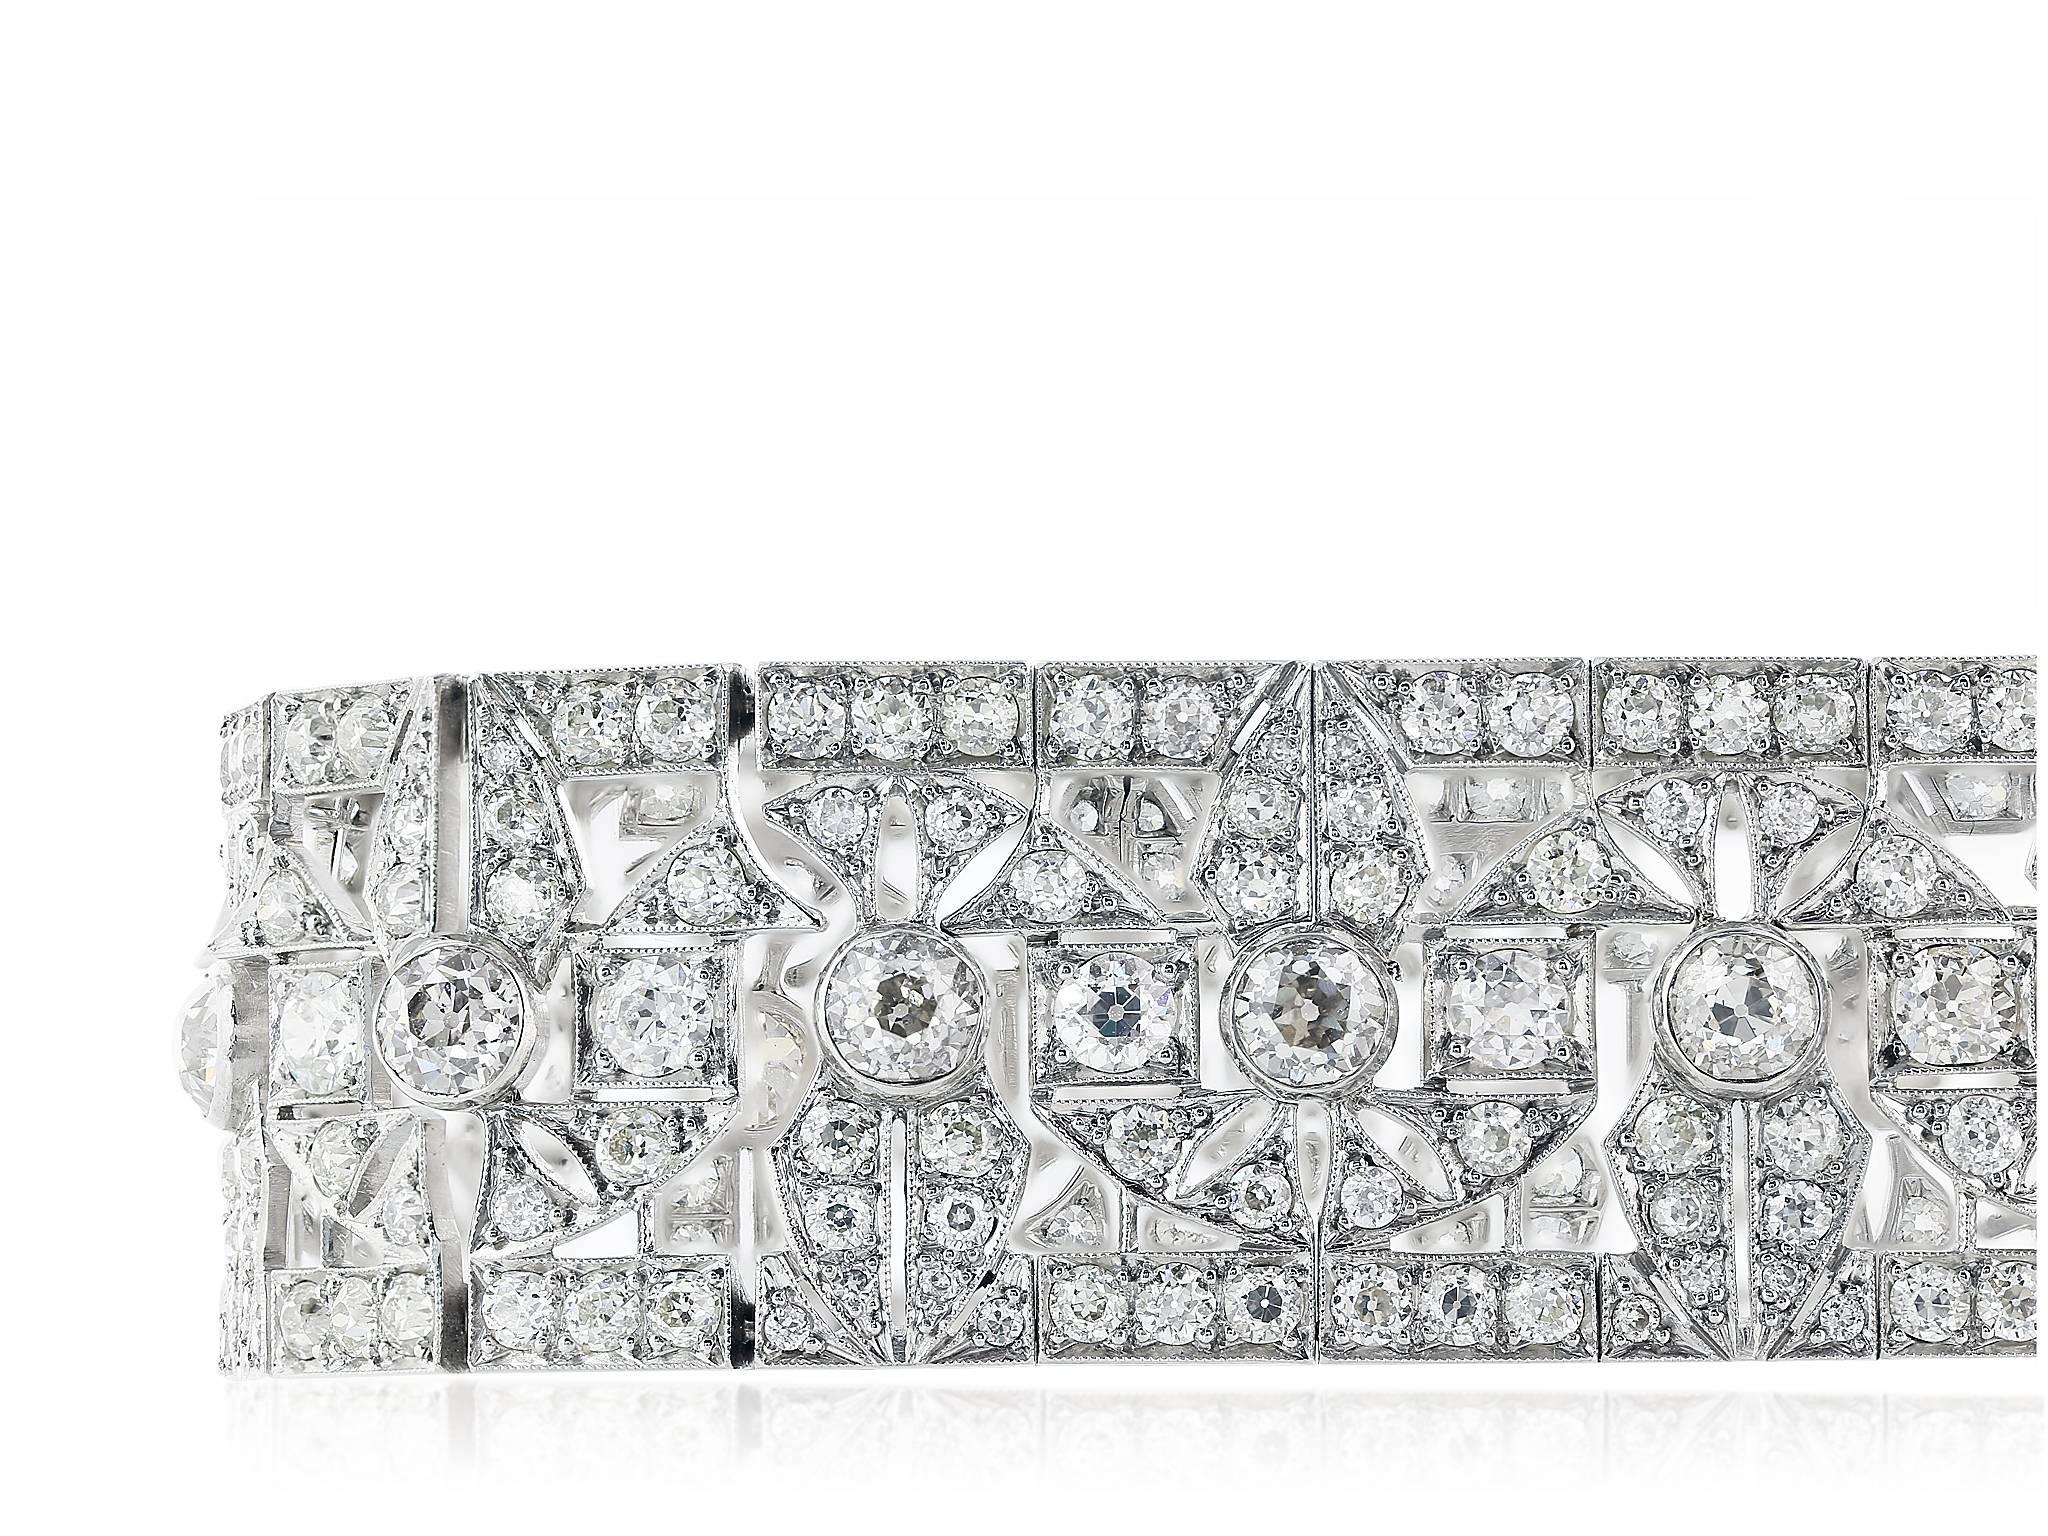 Platinum handmade Art Deco flexible bracelet consisting of approximately 250 Old European cut diamonds with an approximate weight of 20 carats with a color and clarity of F VS1 receptively,signed Black, Starr & Frost.